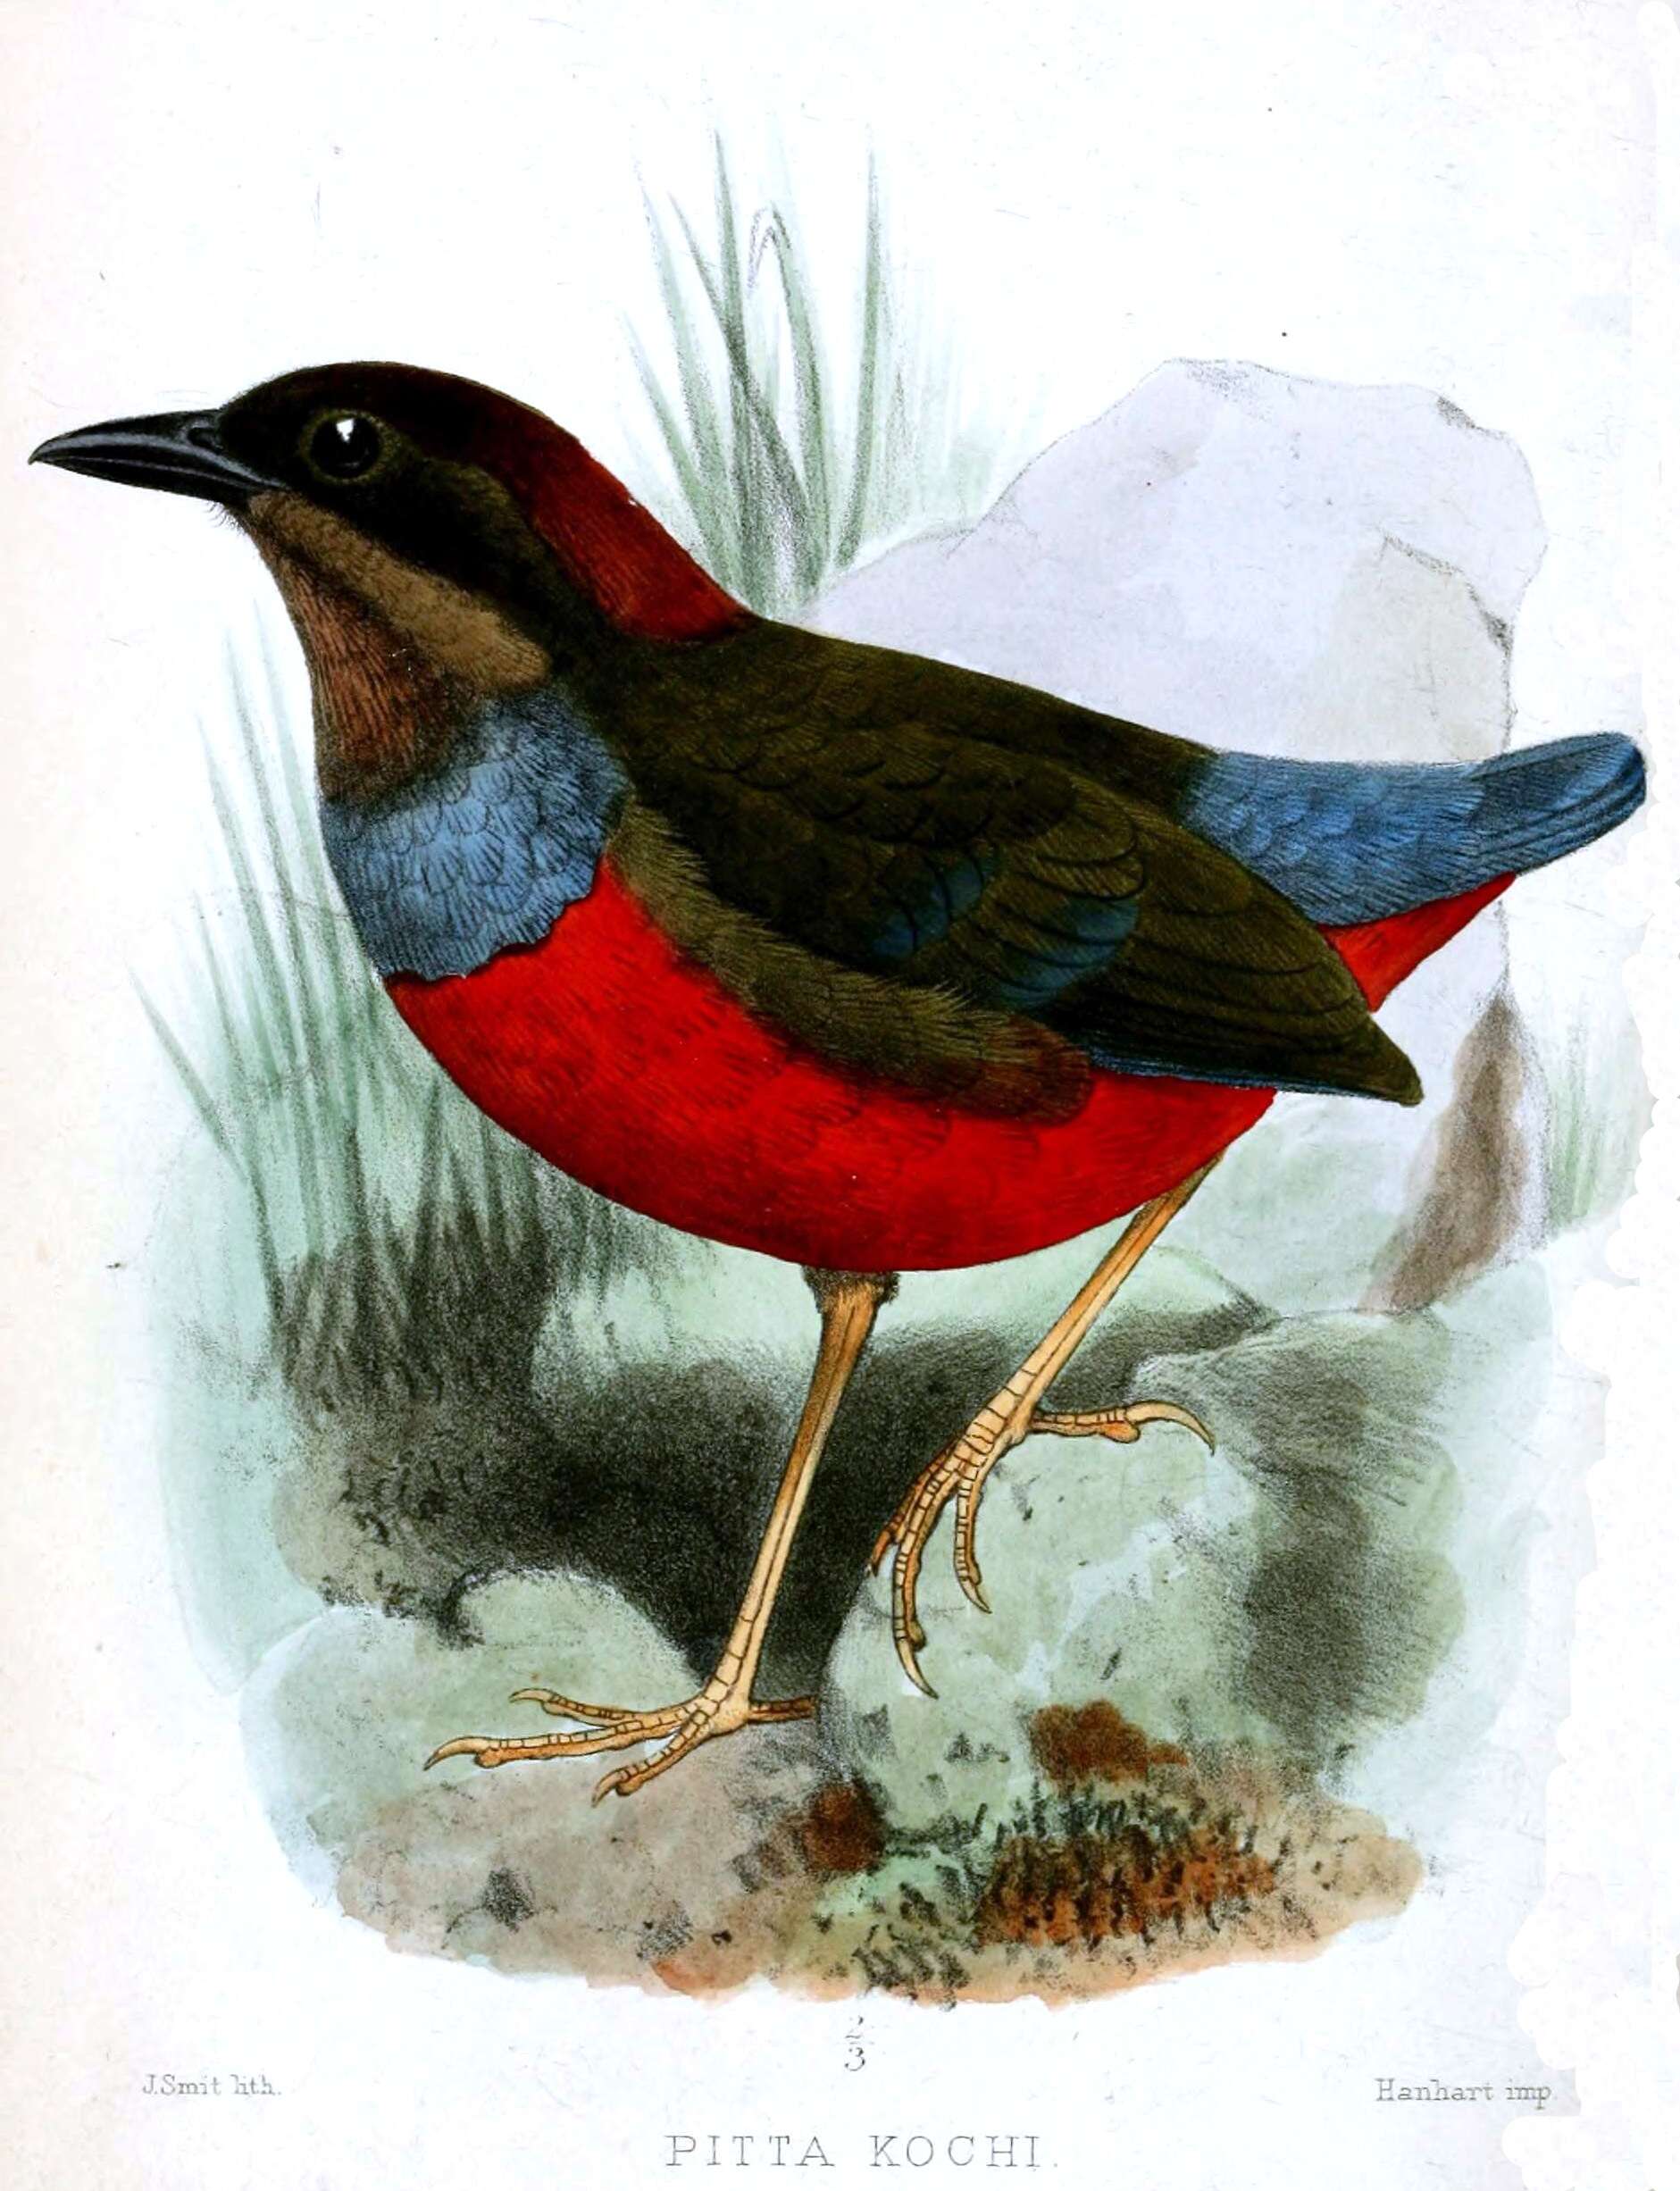 Image of Whiskered Pitta